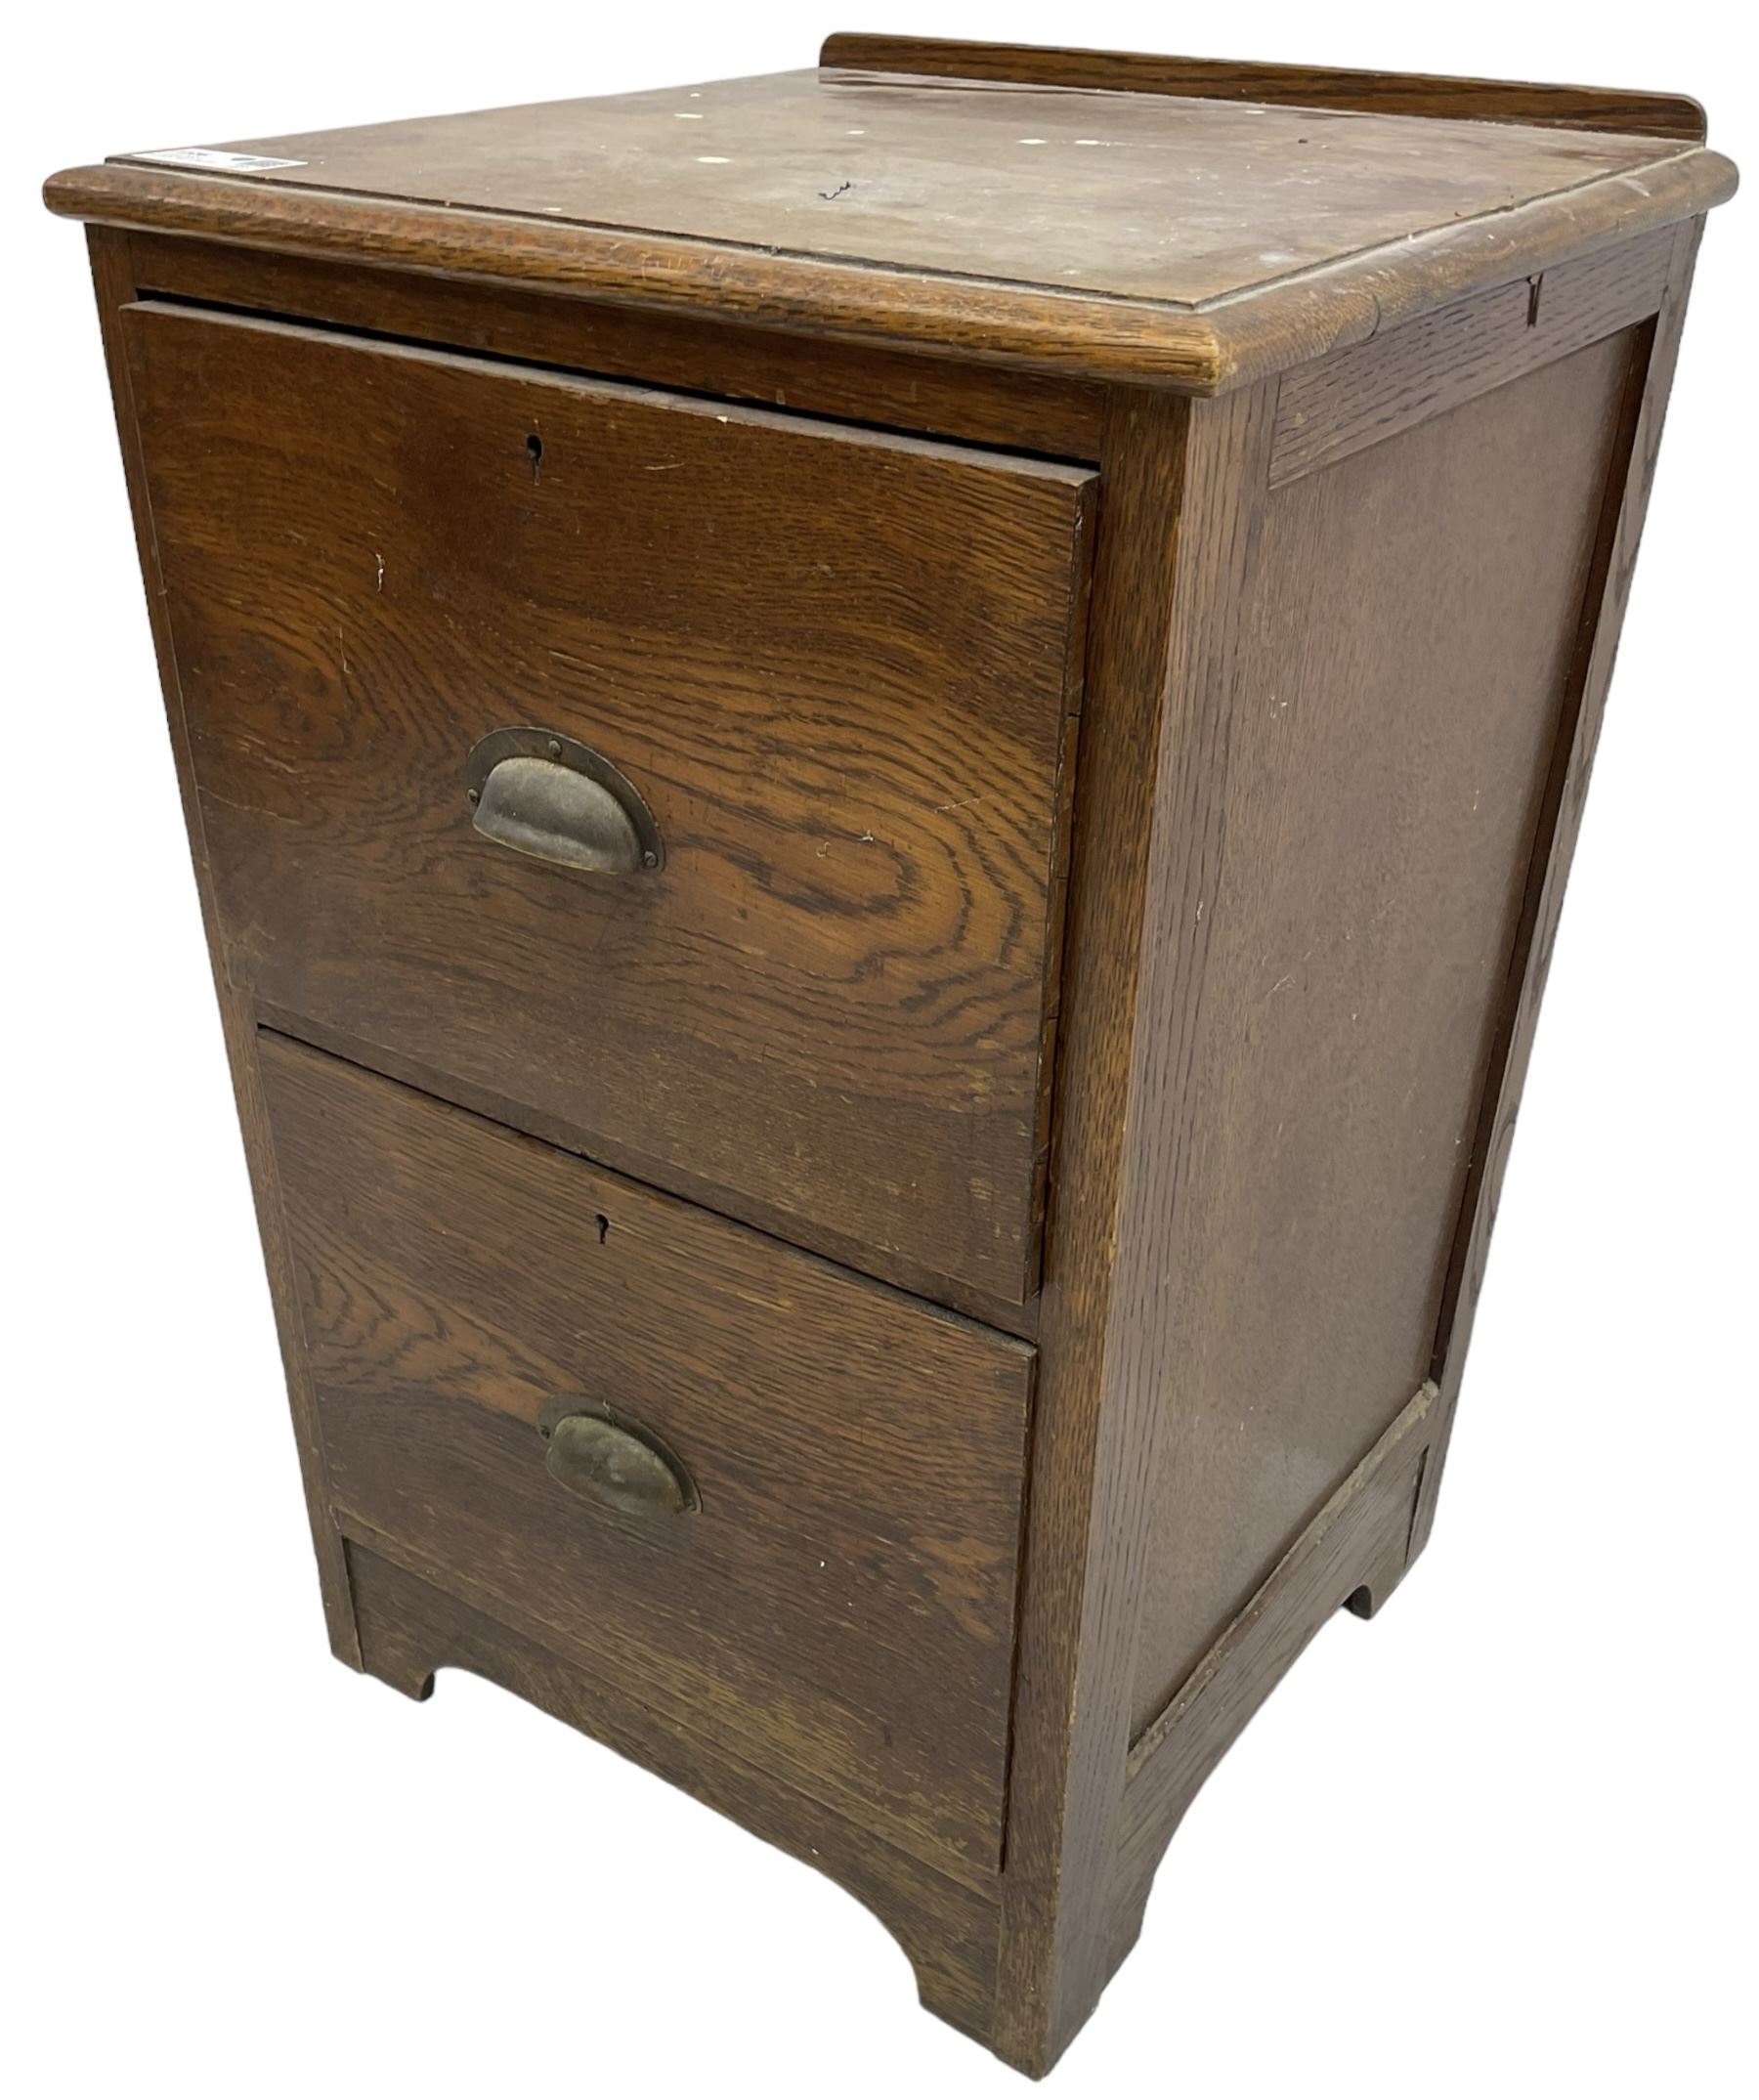 Early 20th century oak two drawer filing cabinet - Image 2 of 5